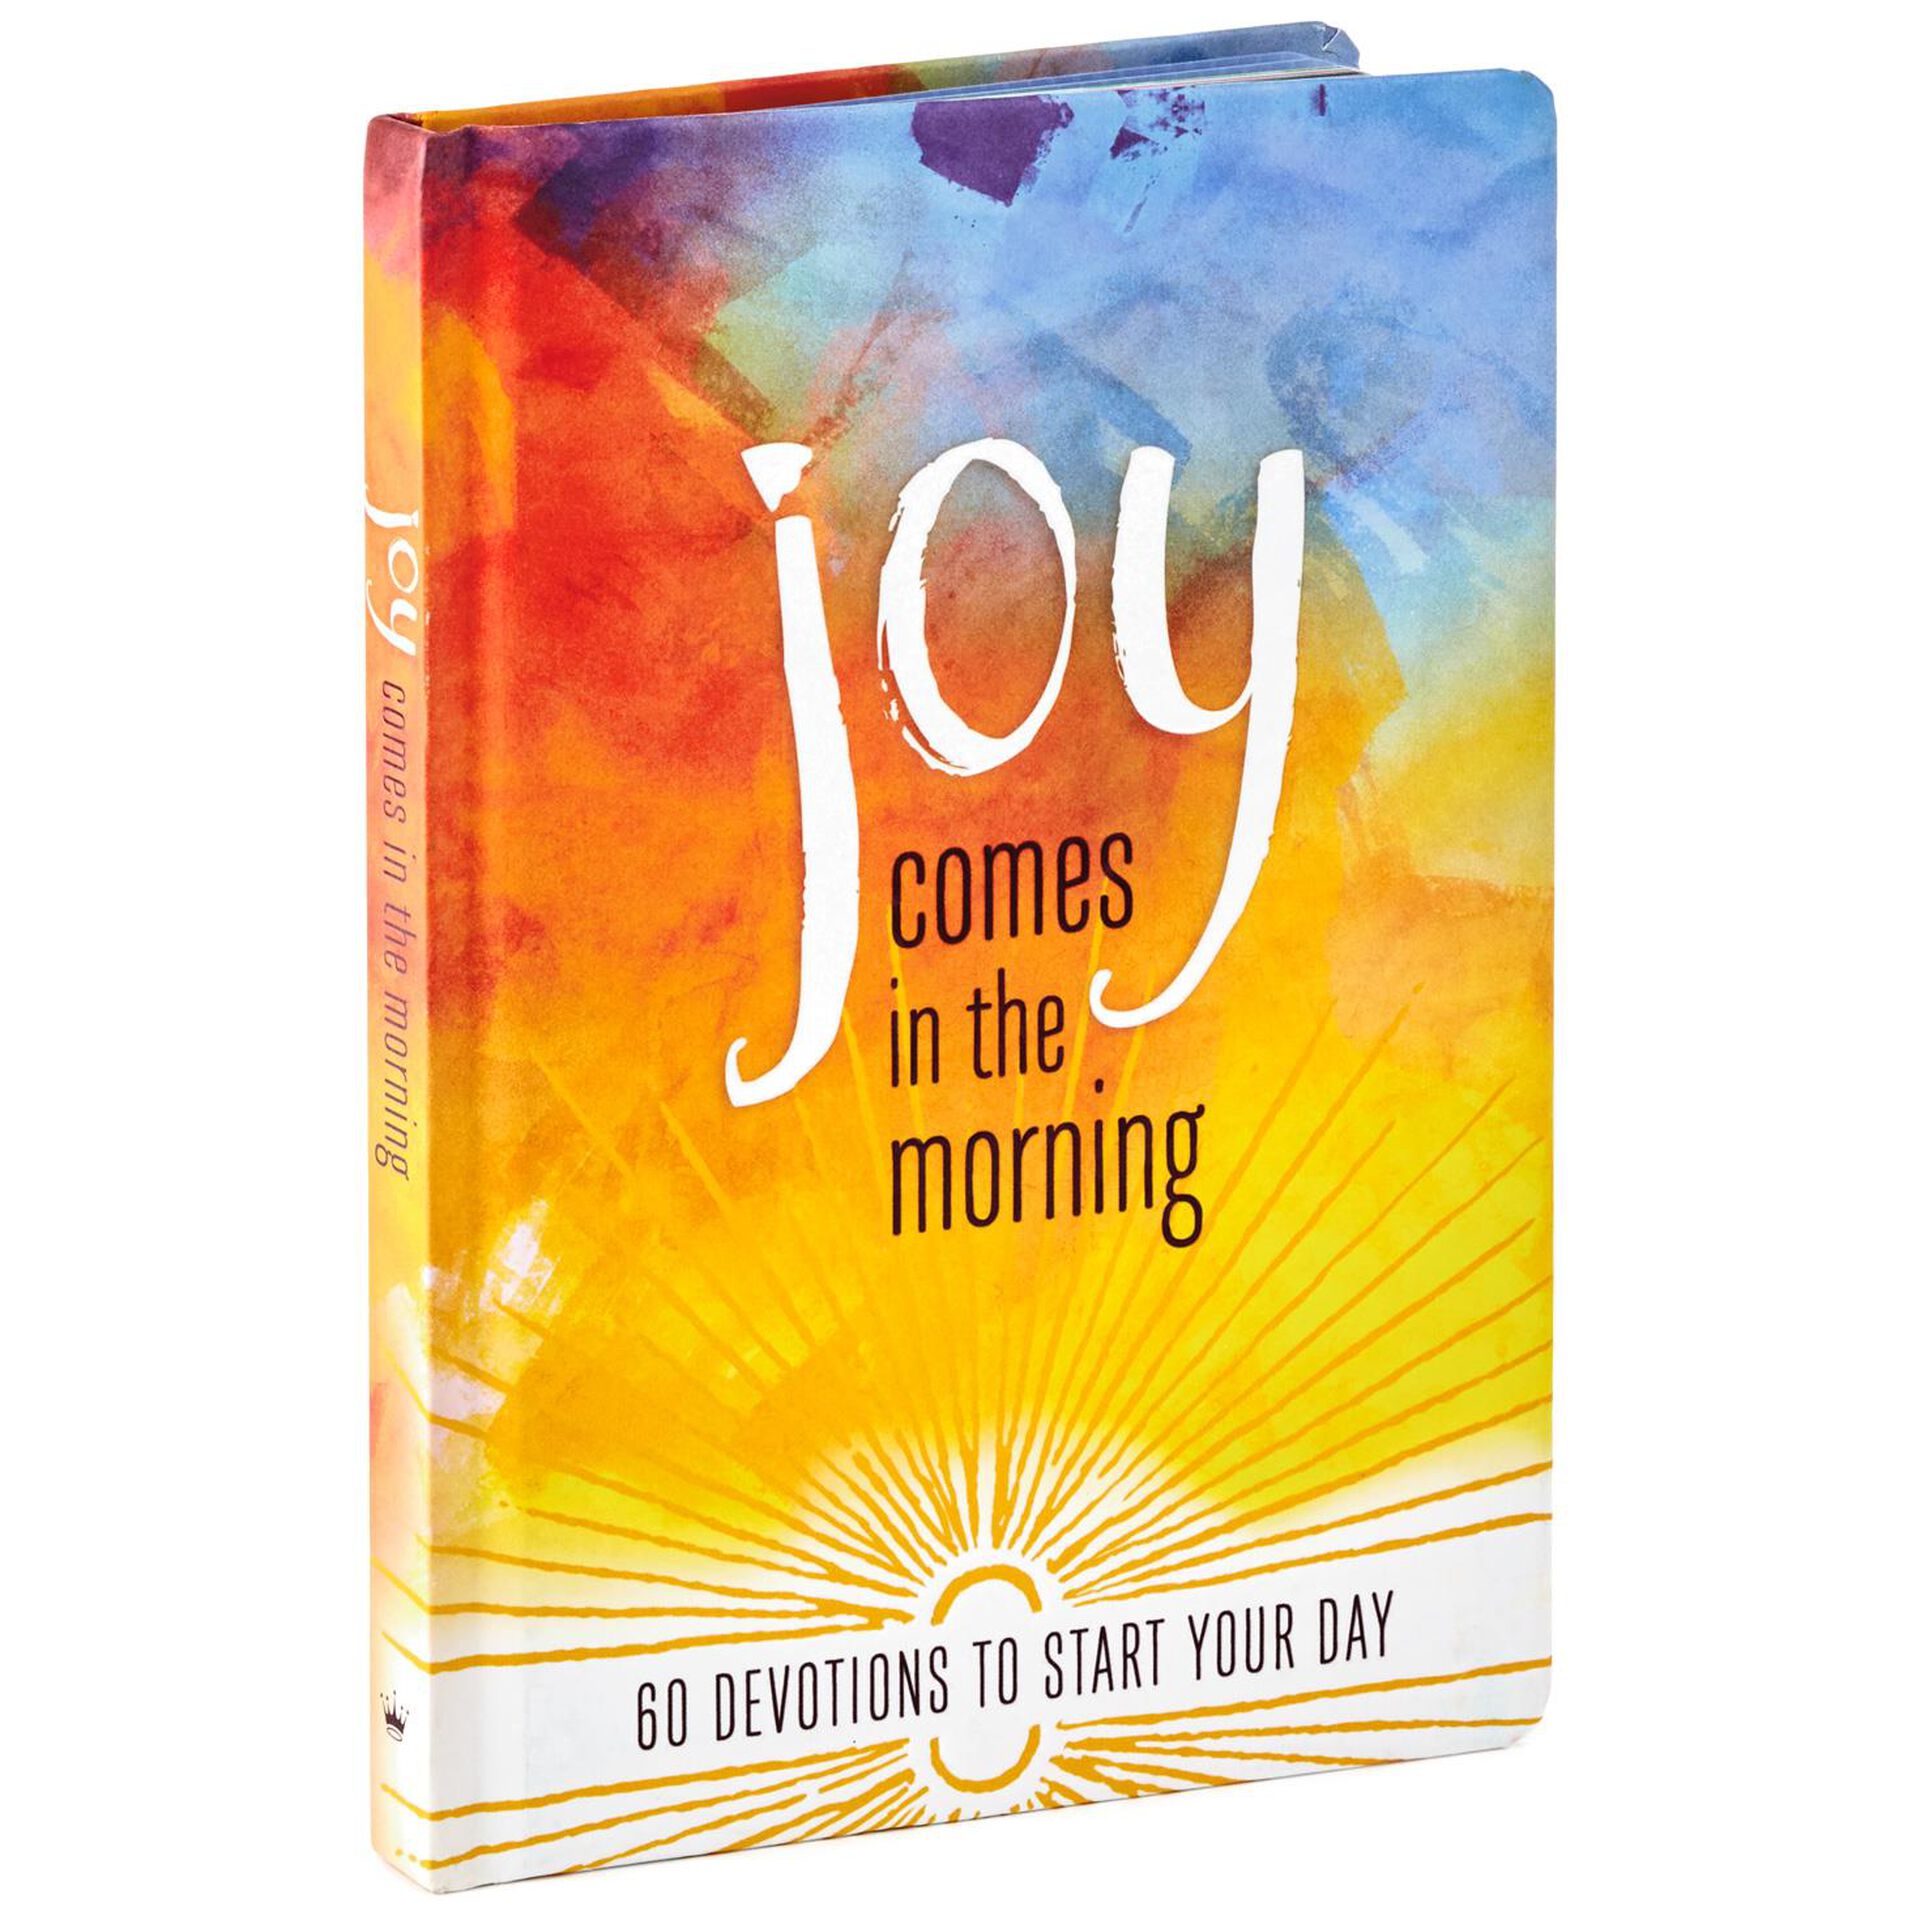 joy-comes-in-the-morning-60-devotions-to-start-your-day-book